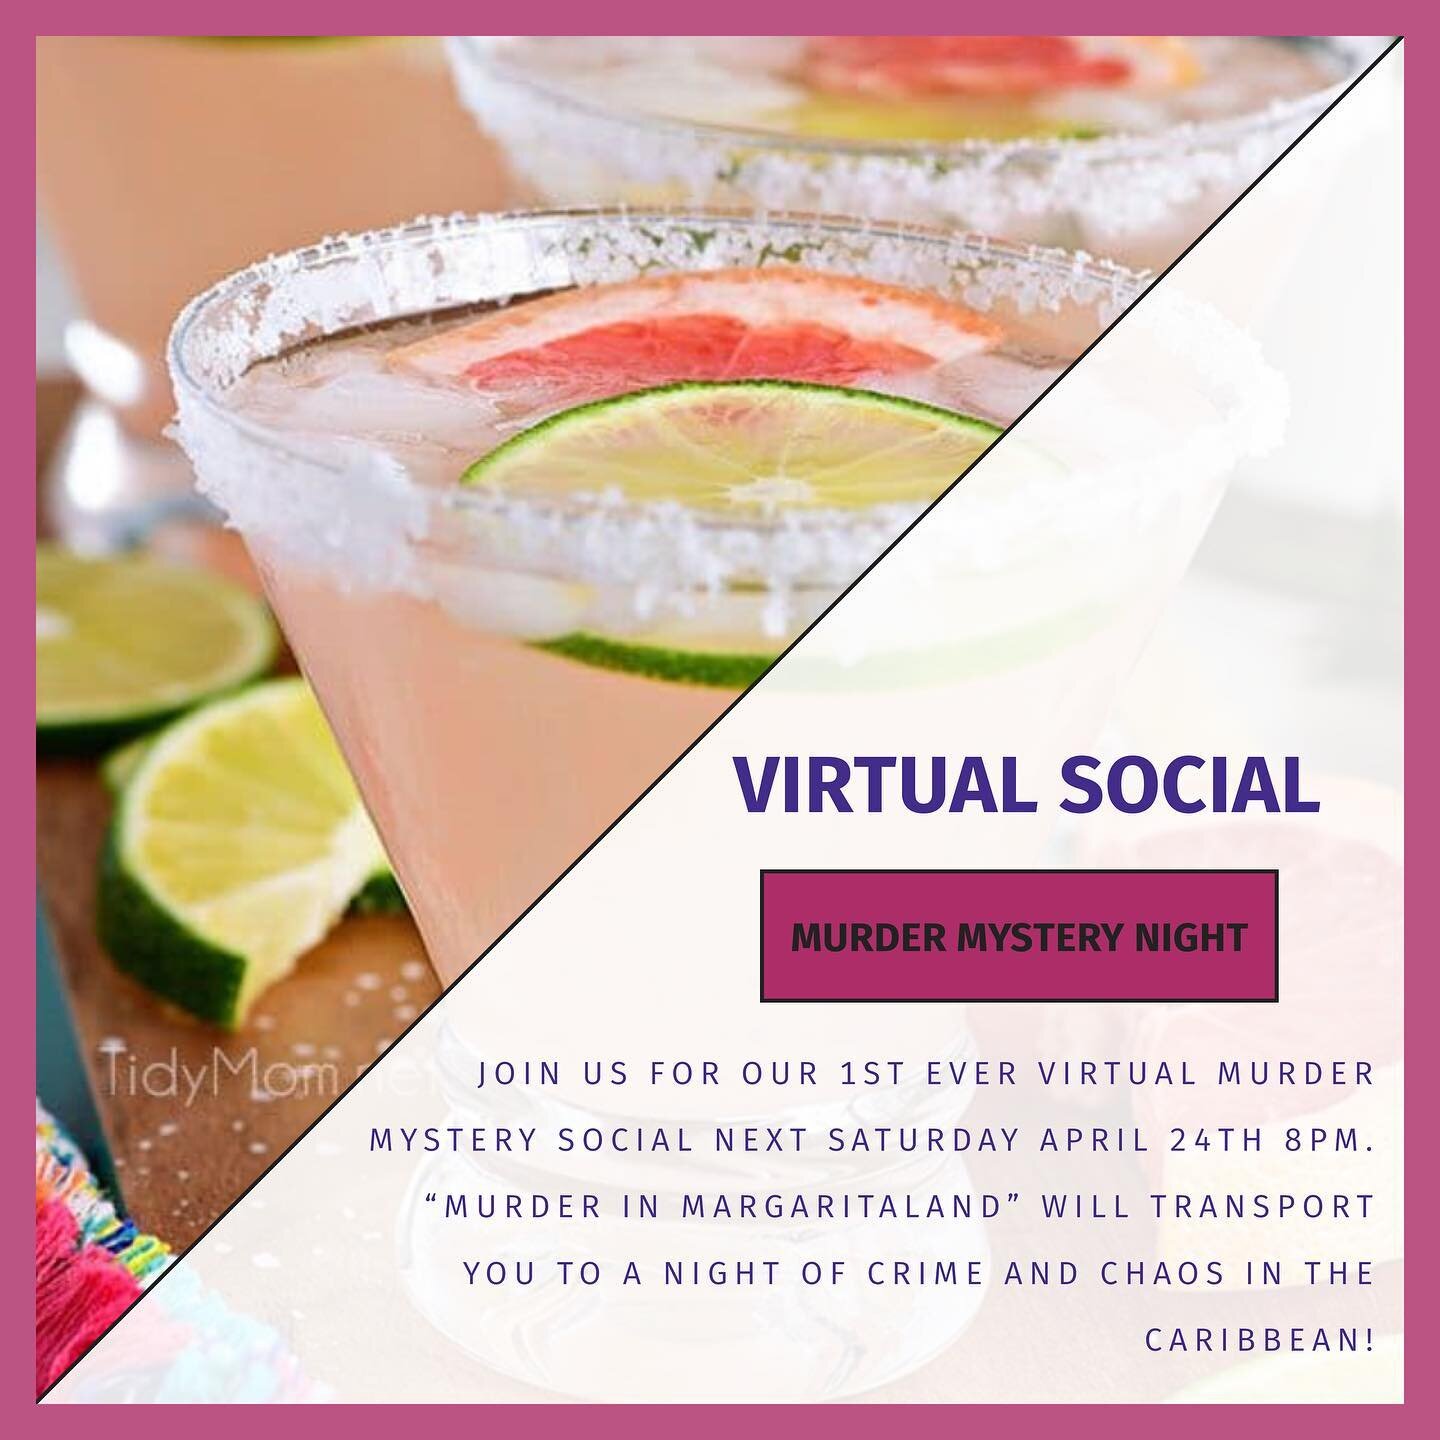 Join us for our 1st ever Virtual Murder Mystery Social next Saturday April 24th 8pm. &quot;Murder in Margaritaland&quot; will transport you to a night of crime and chaos in the Caribbean! Who doesn't wish we weren't in the Caribbean at the moment (co